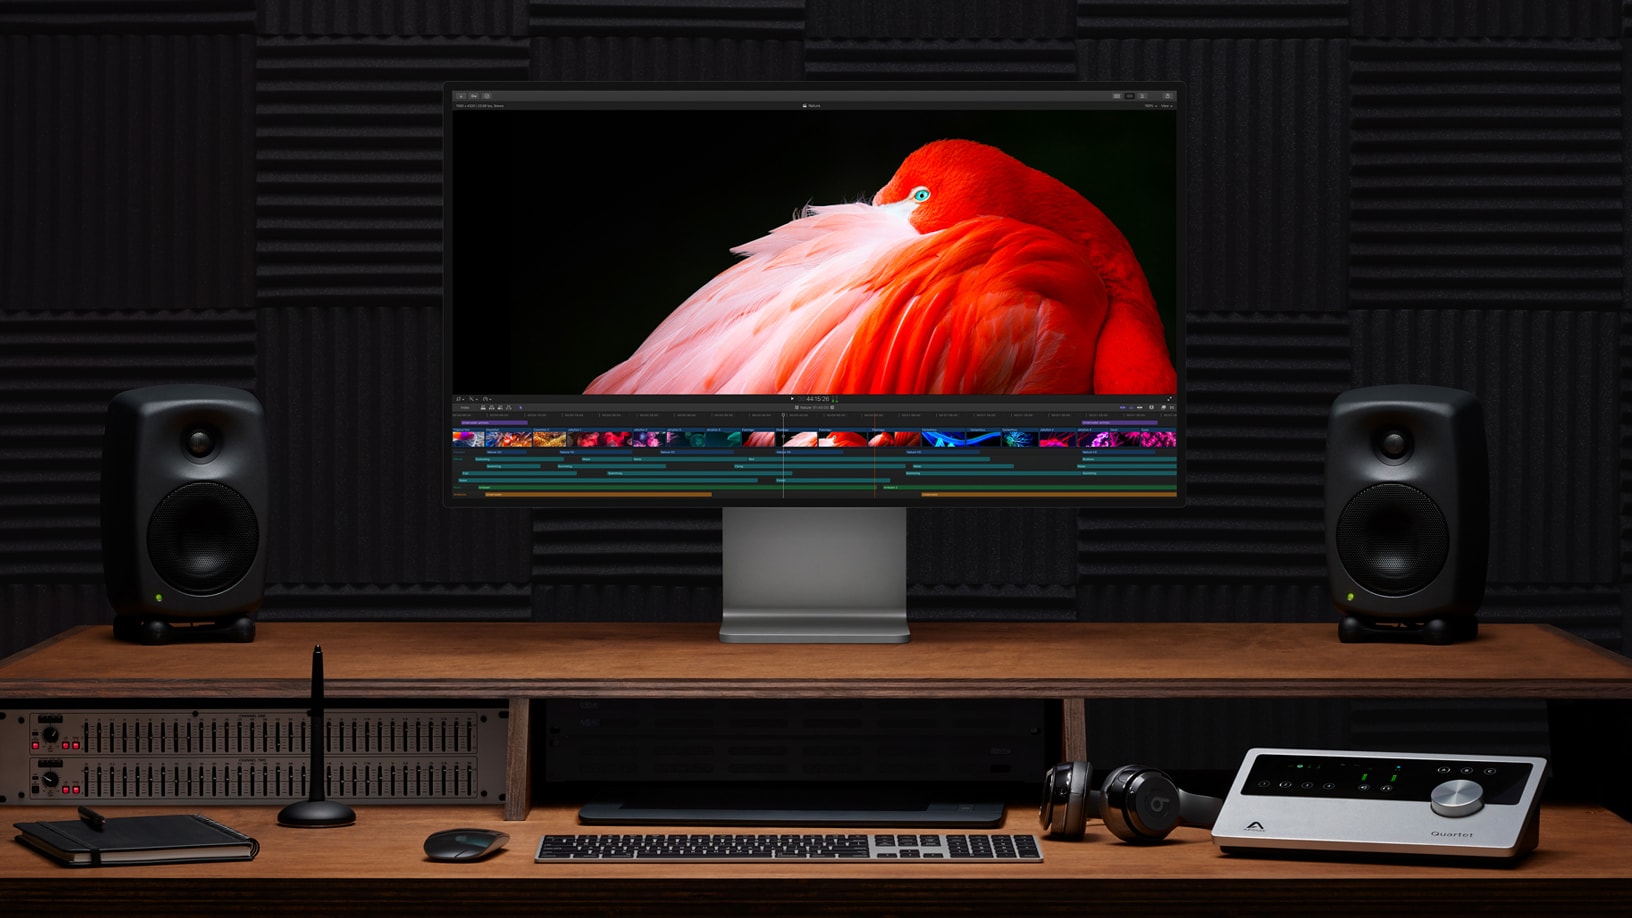 Apple Pro Display XDR in a professional workplace